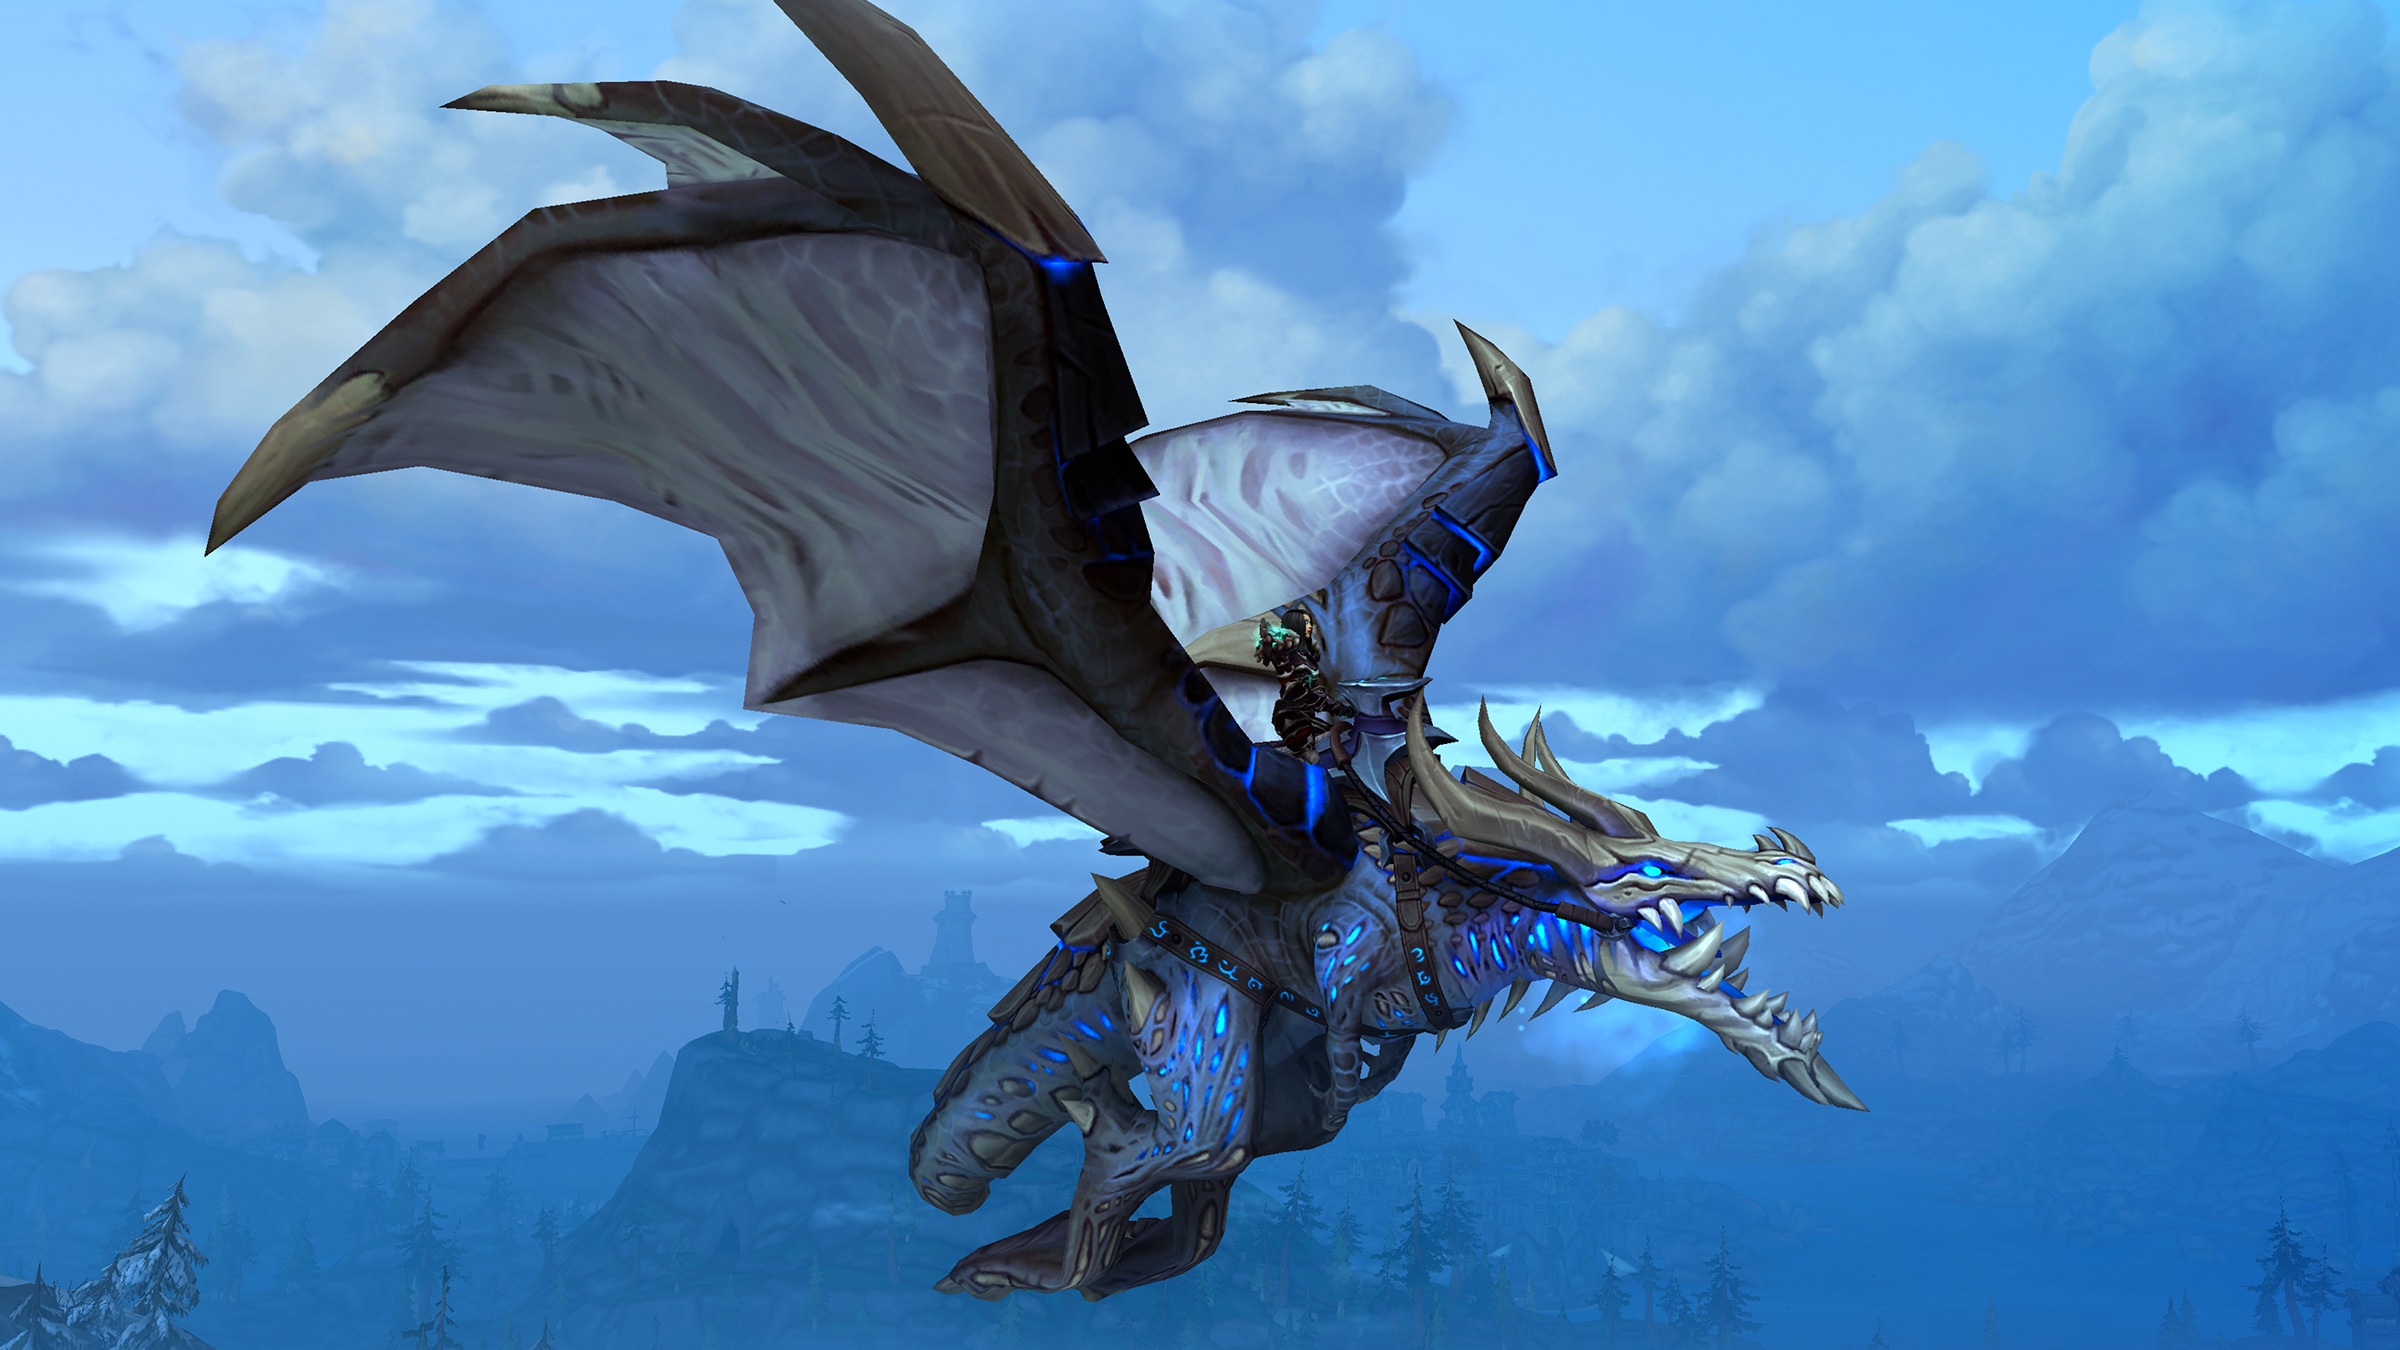 Play a Death Knight in Wrath of the Lich King Classic™ and Get a Mount in WoW®